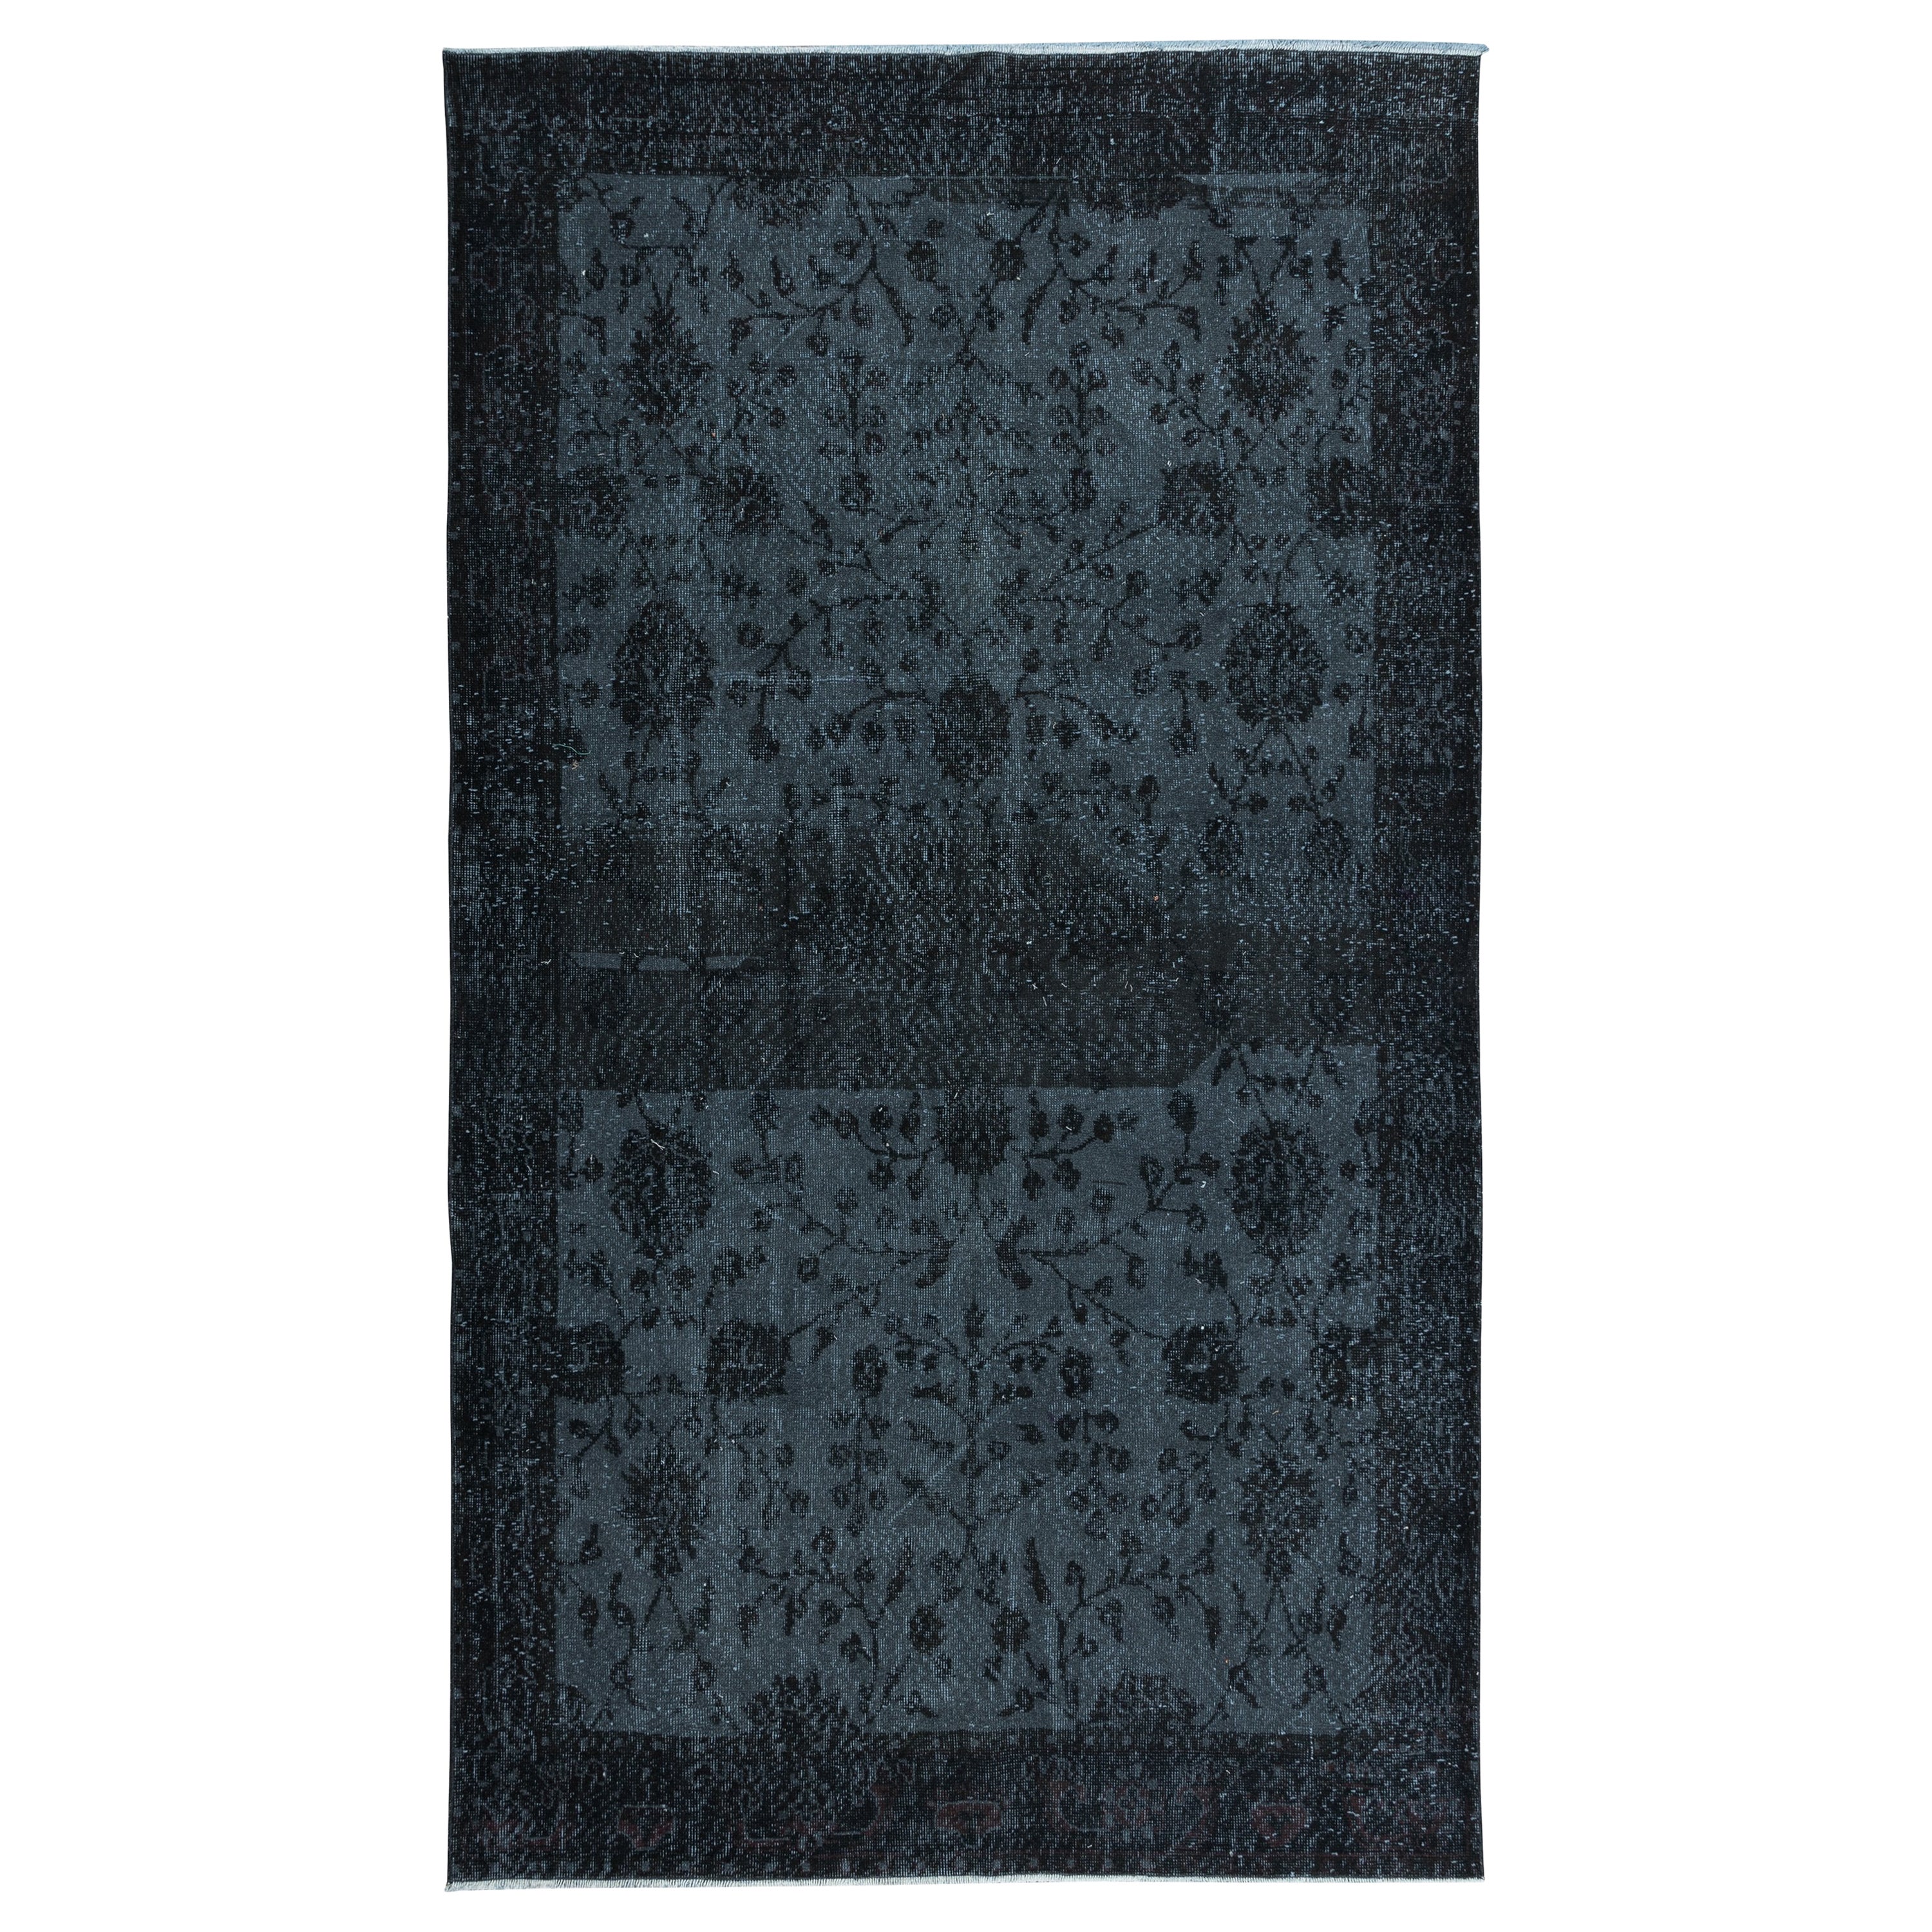 5.5x9.8 Ft Black Wool Area Rug for Modern Interiors, Hand-Knotted in Turkey For Sale